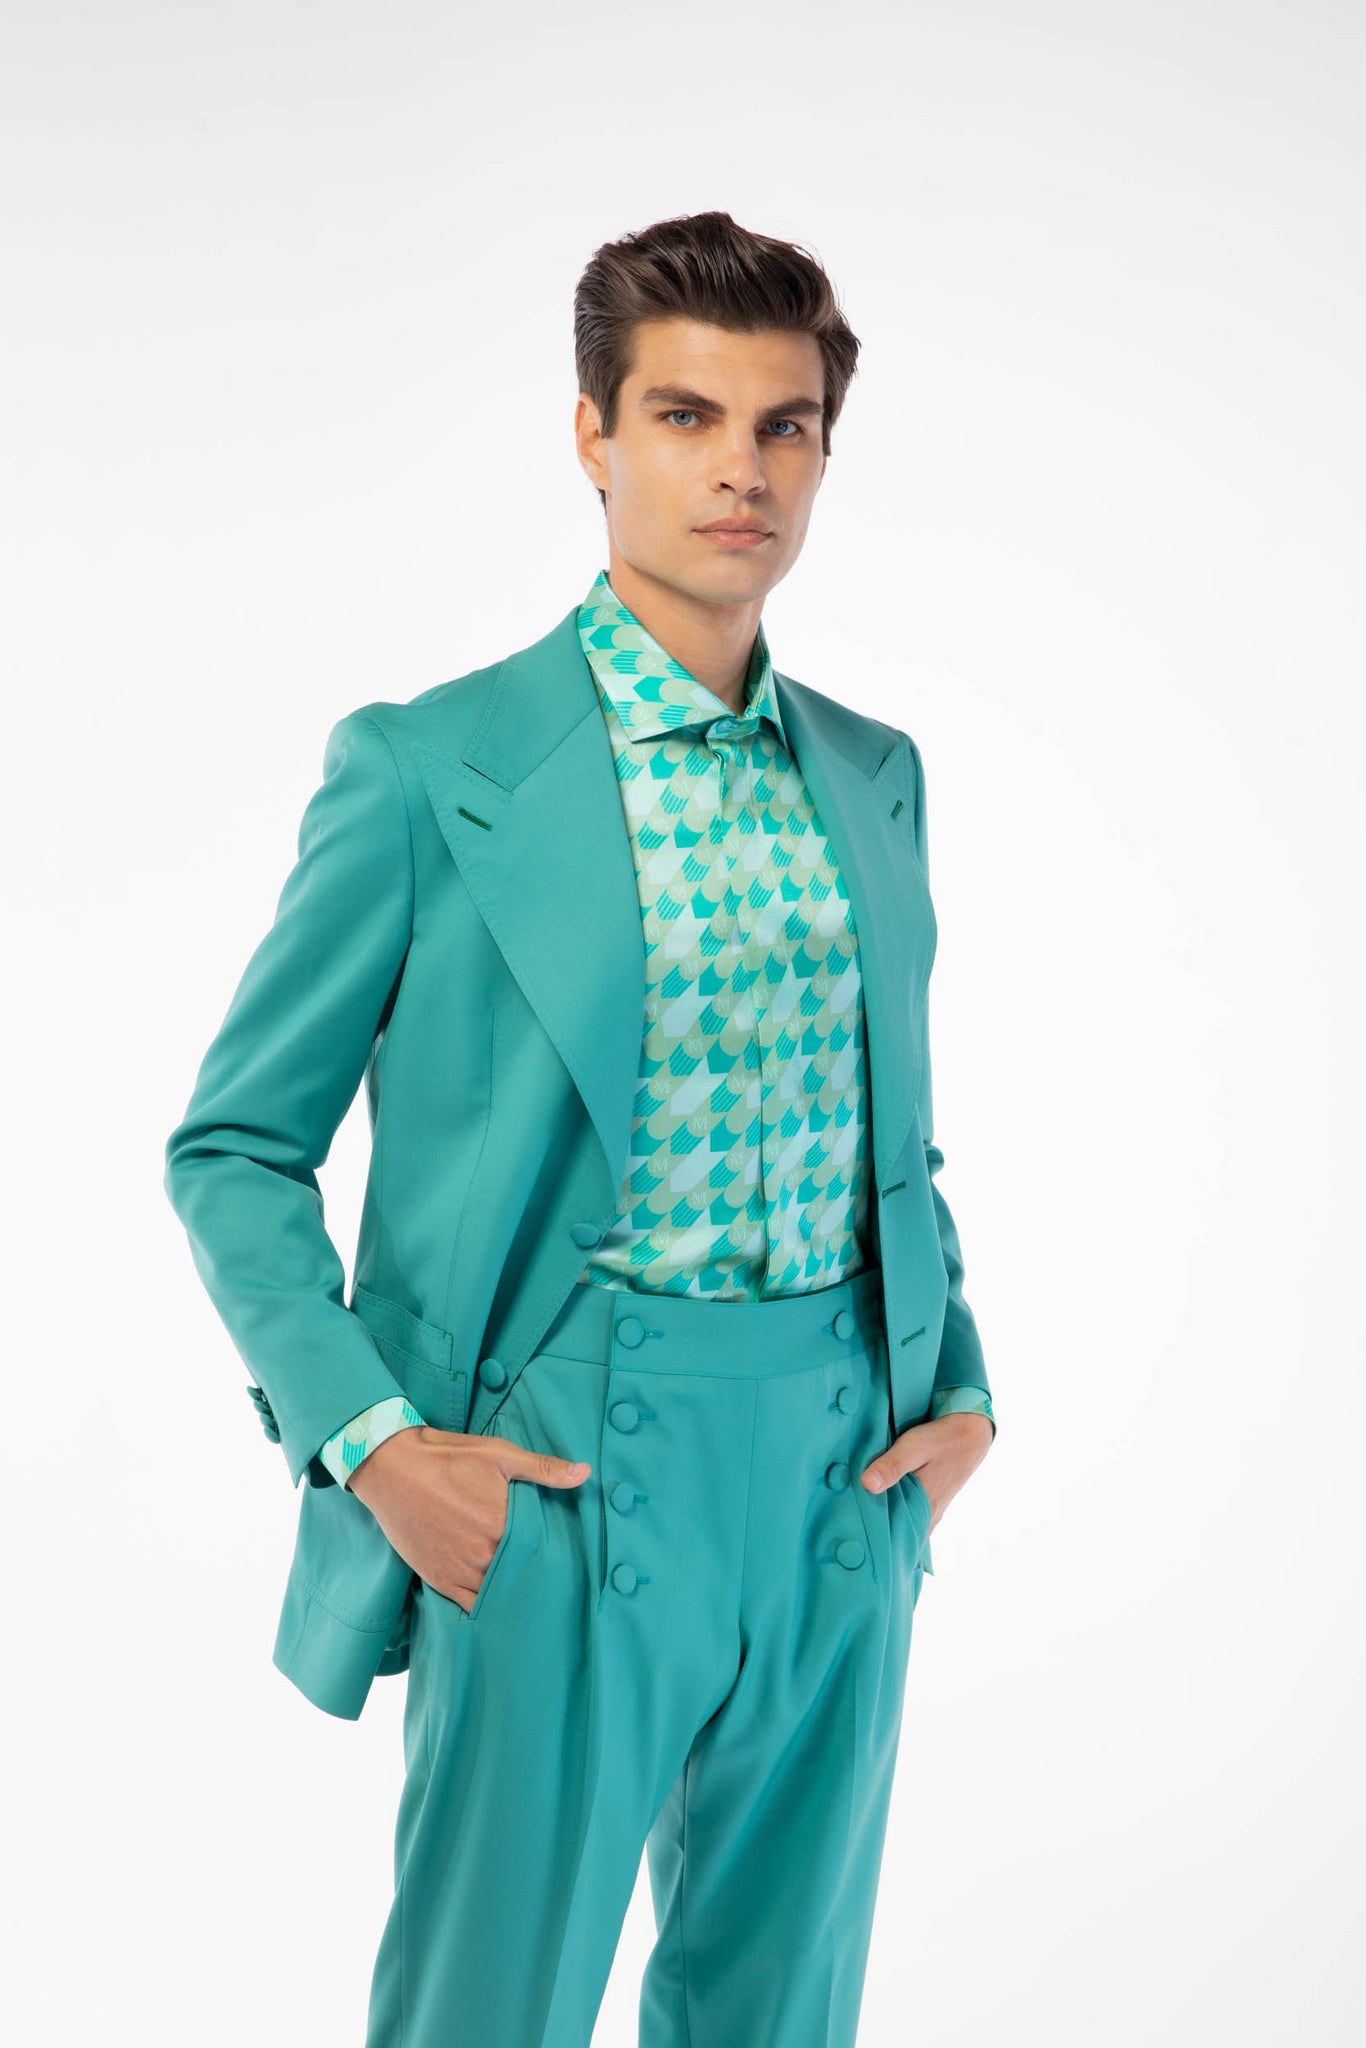 TEAL BUTTON DELUXE SIGNATURE TWO PIECE SUIT